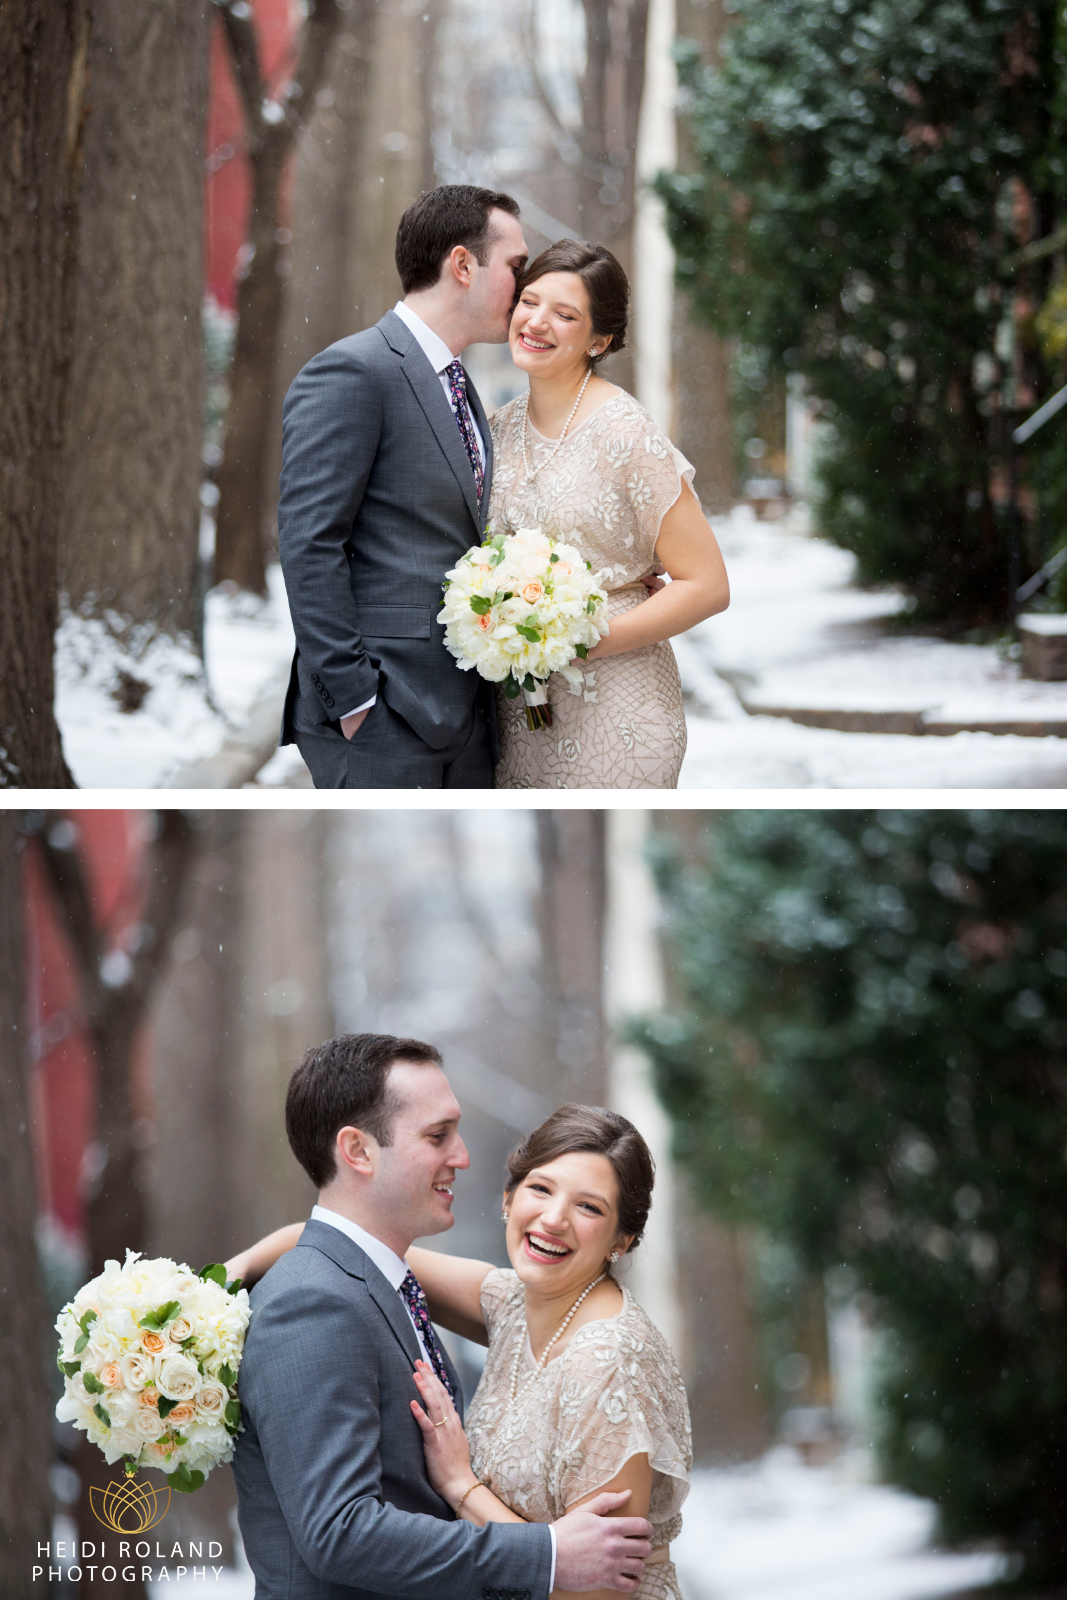 first look wedding photos outside in the Philadelphia winter